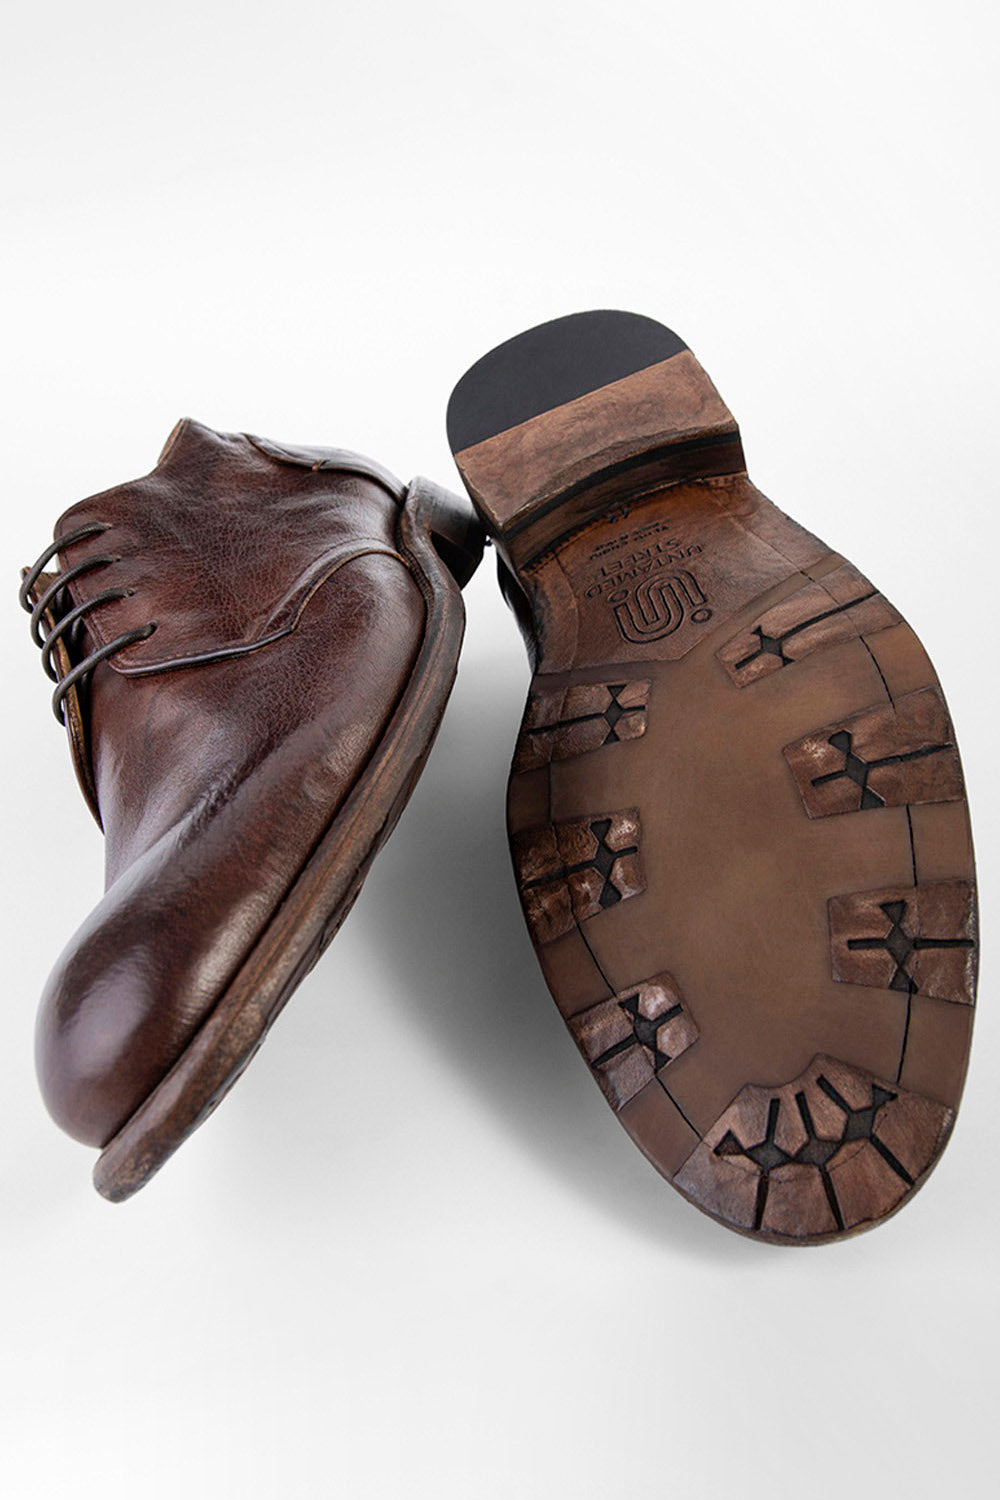 KNIGHTON noble-brown low chukka boots.